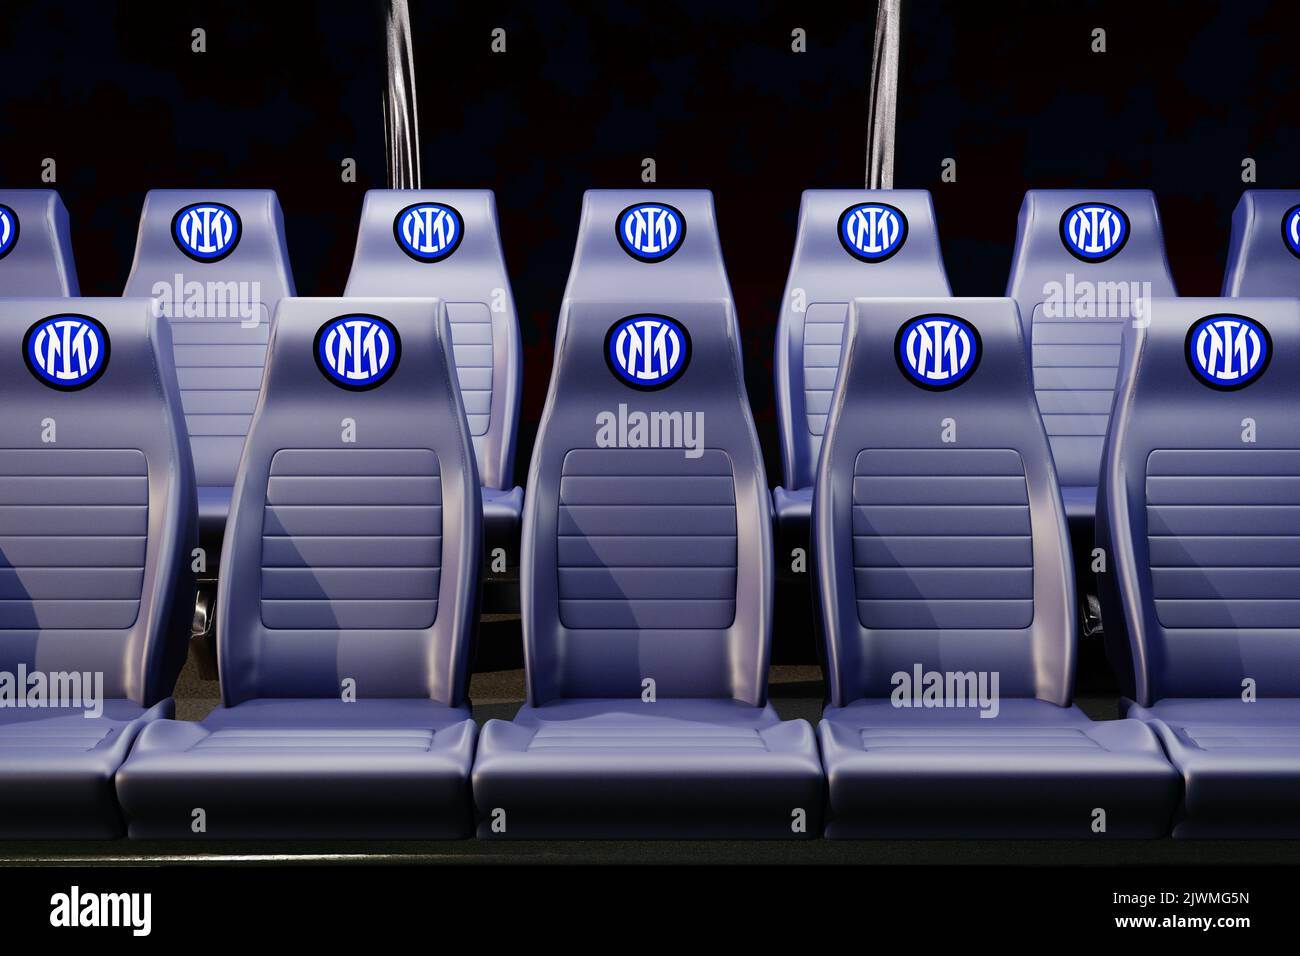 Inter football club. Substitute bench seat. 3D Render Stock Photo